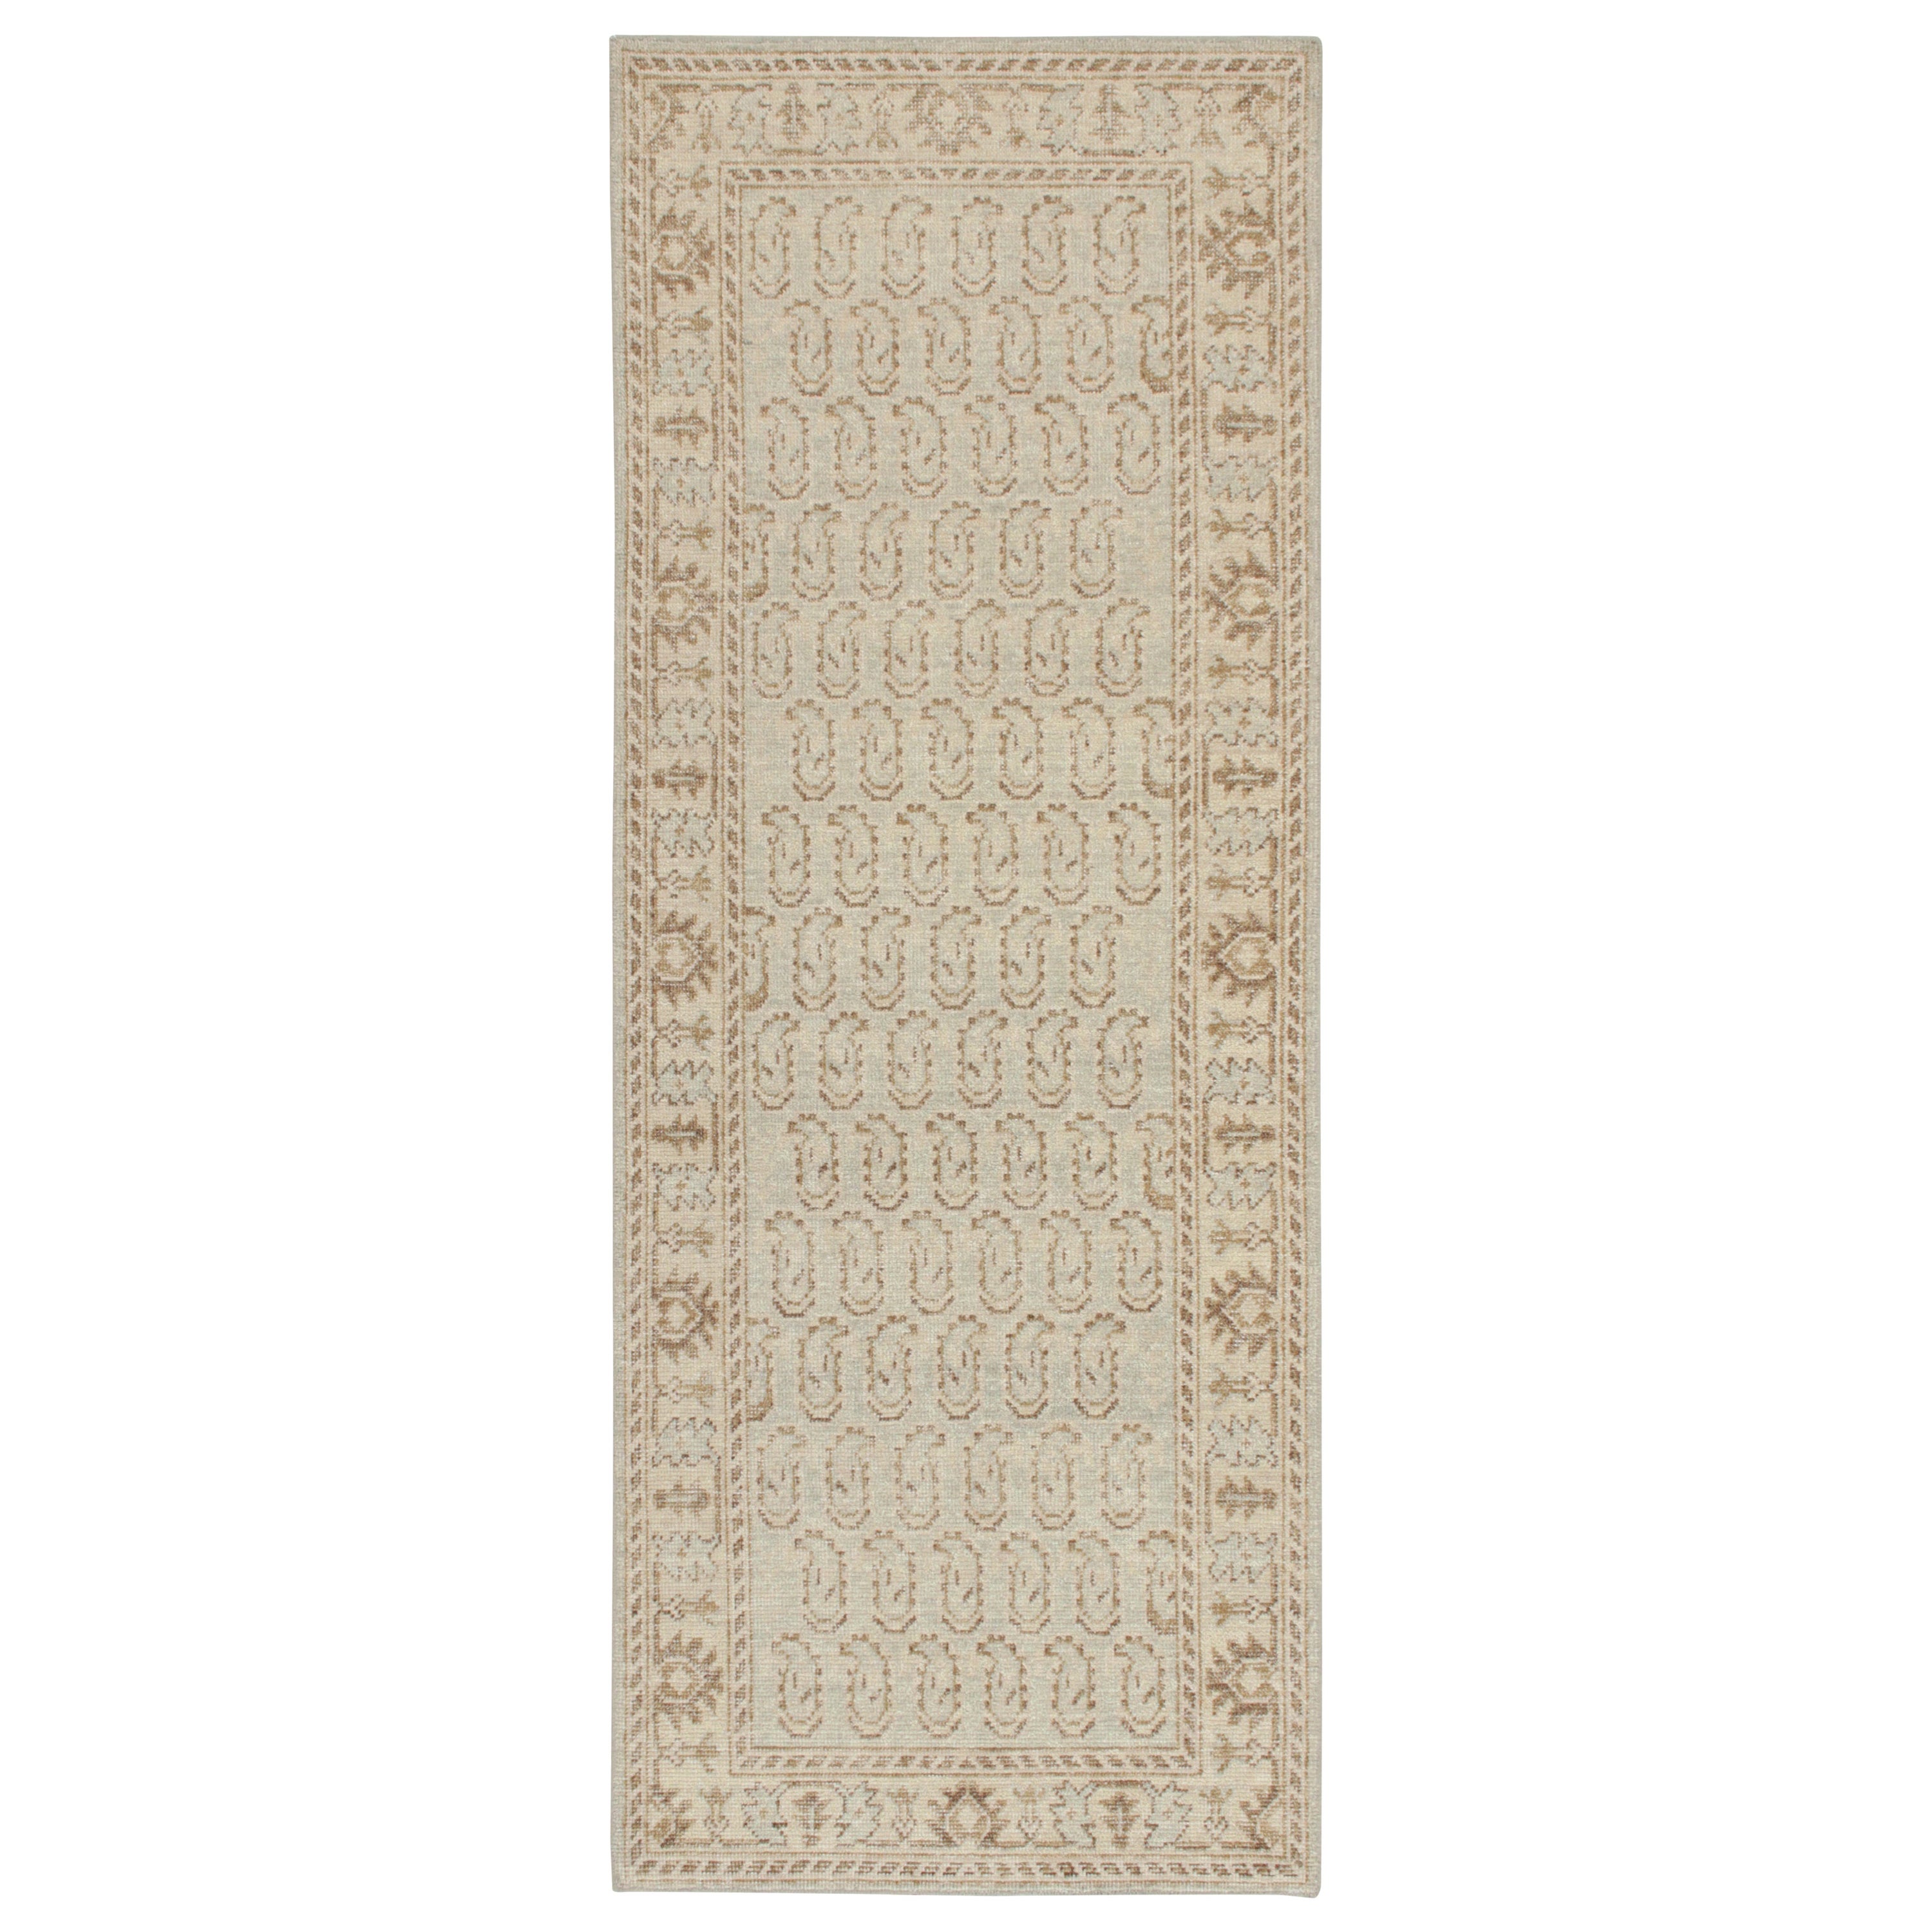 Rug & Kilim’stribal Style Rug in Blue with Beige-Brown Paisley Patterns For Sale